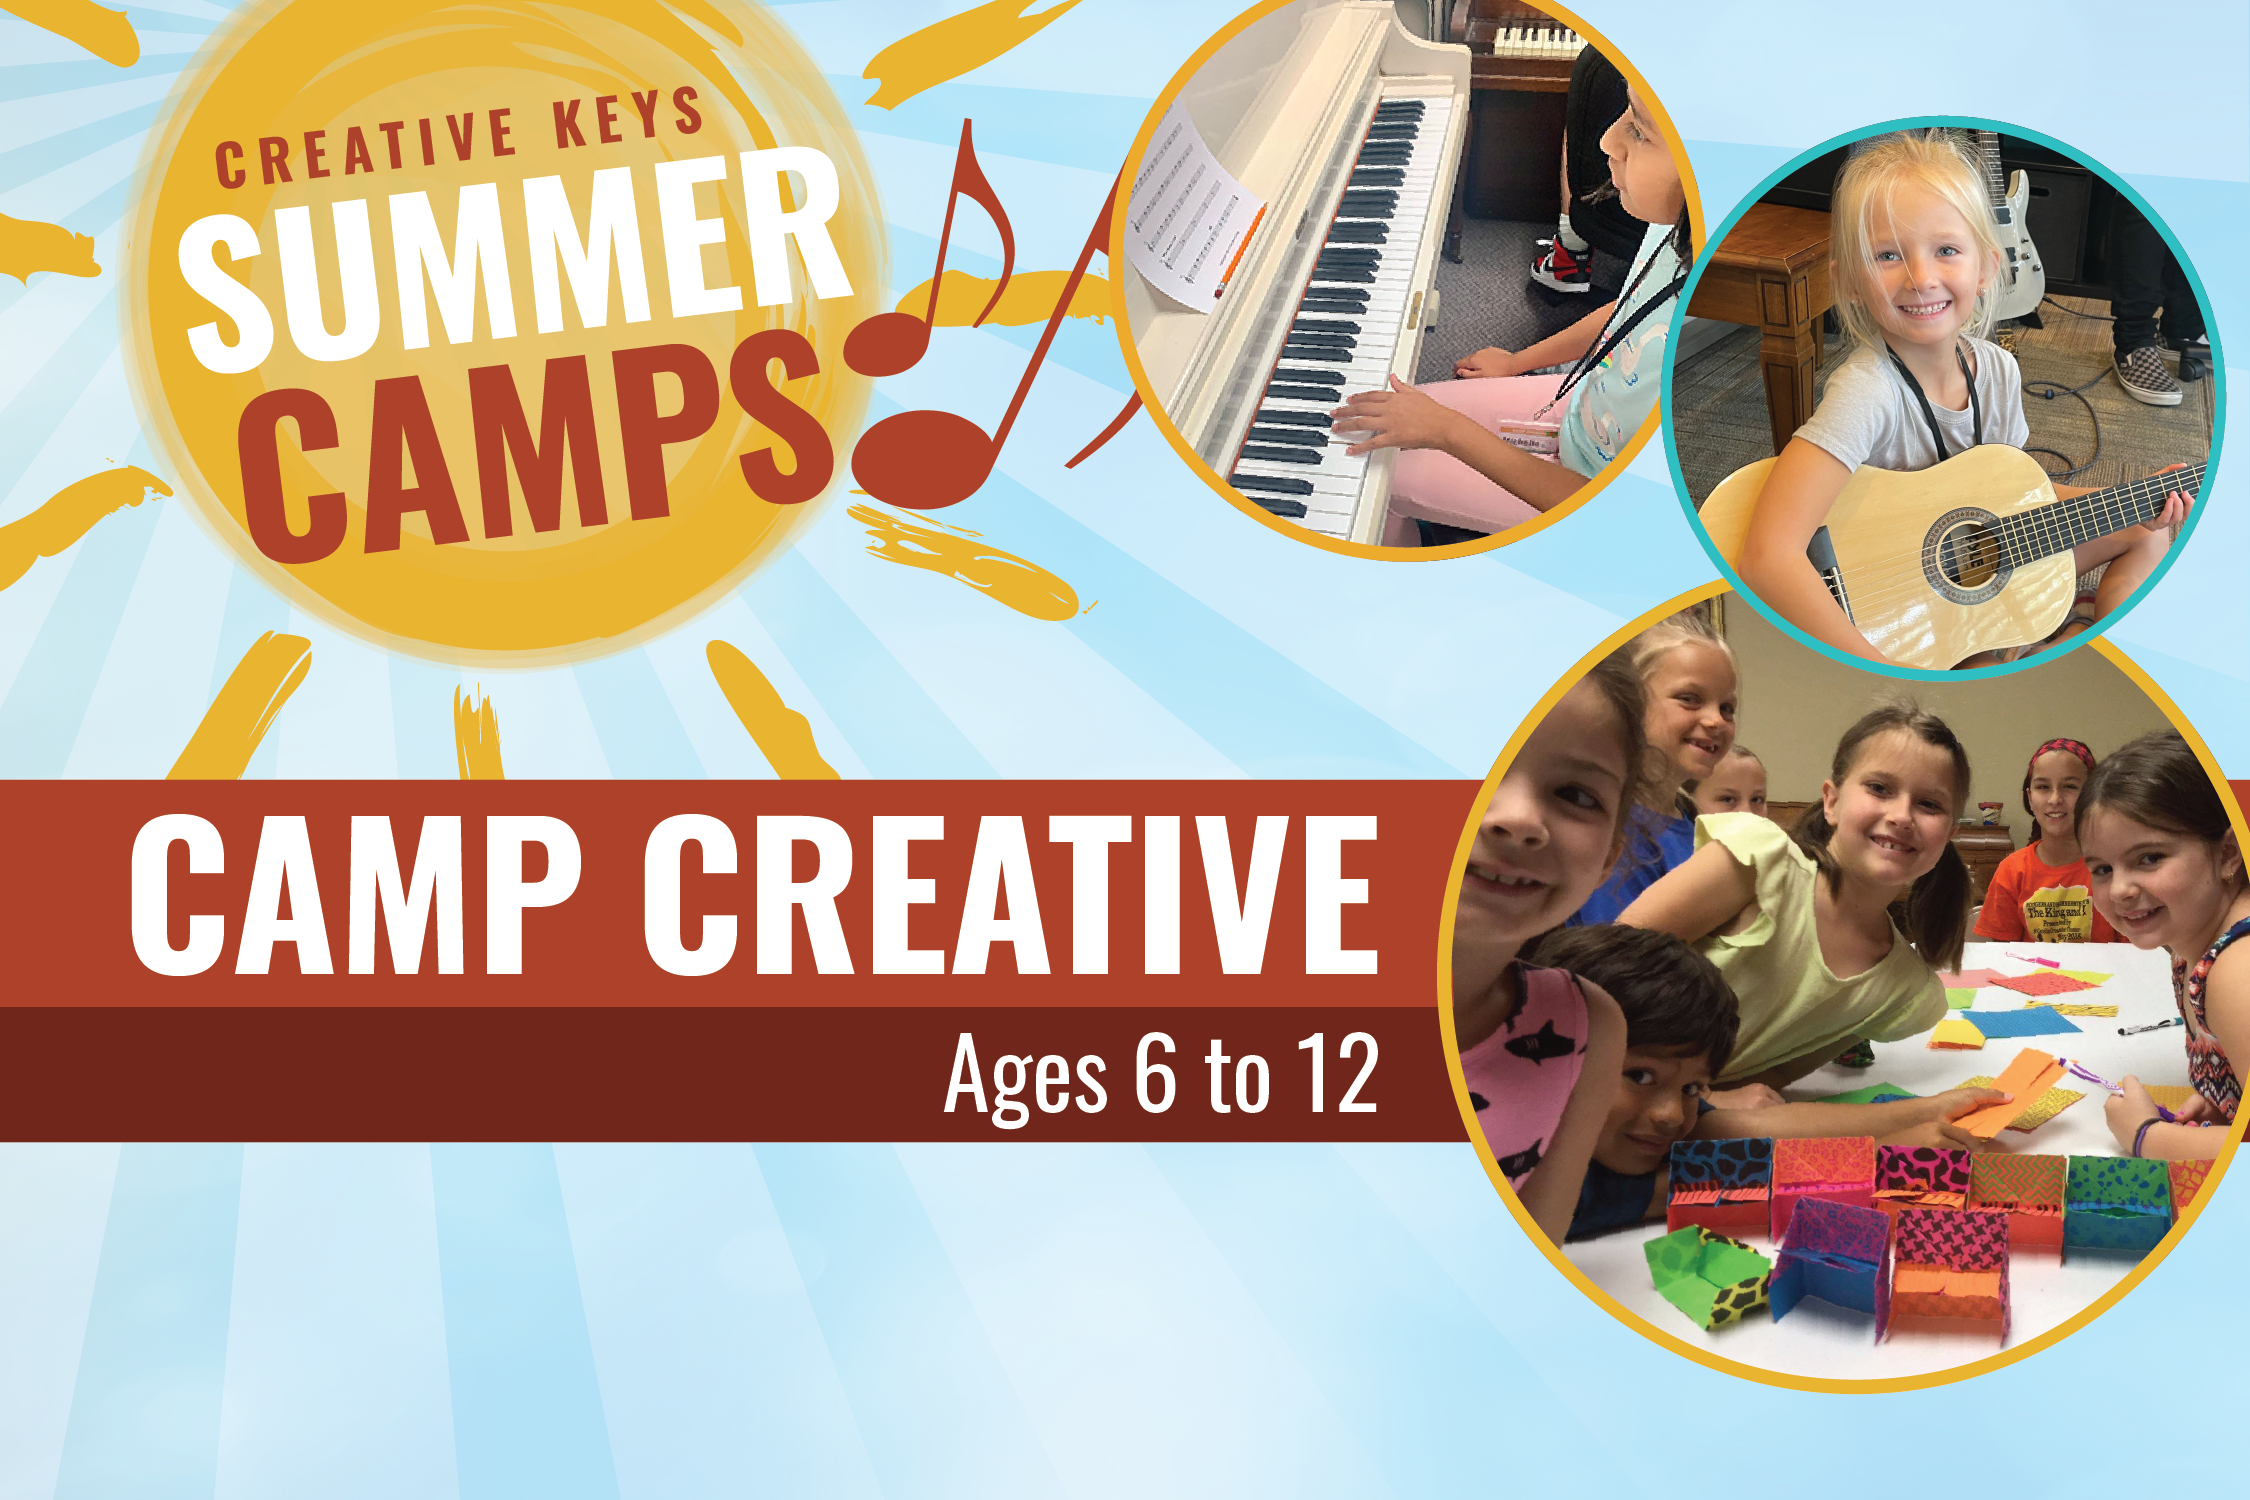 Camp Creative Dunedin Summer Music Camp for Kids Clearwater Palm Harbor